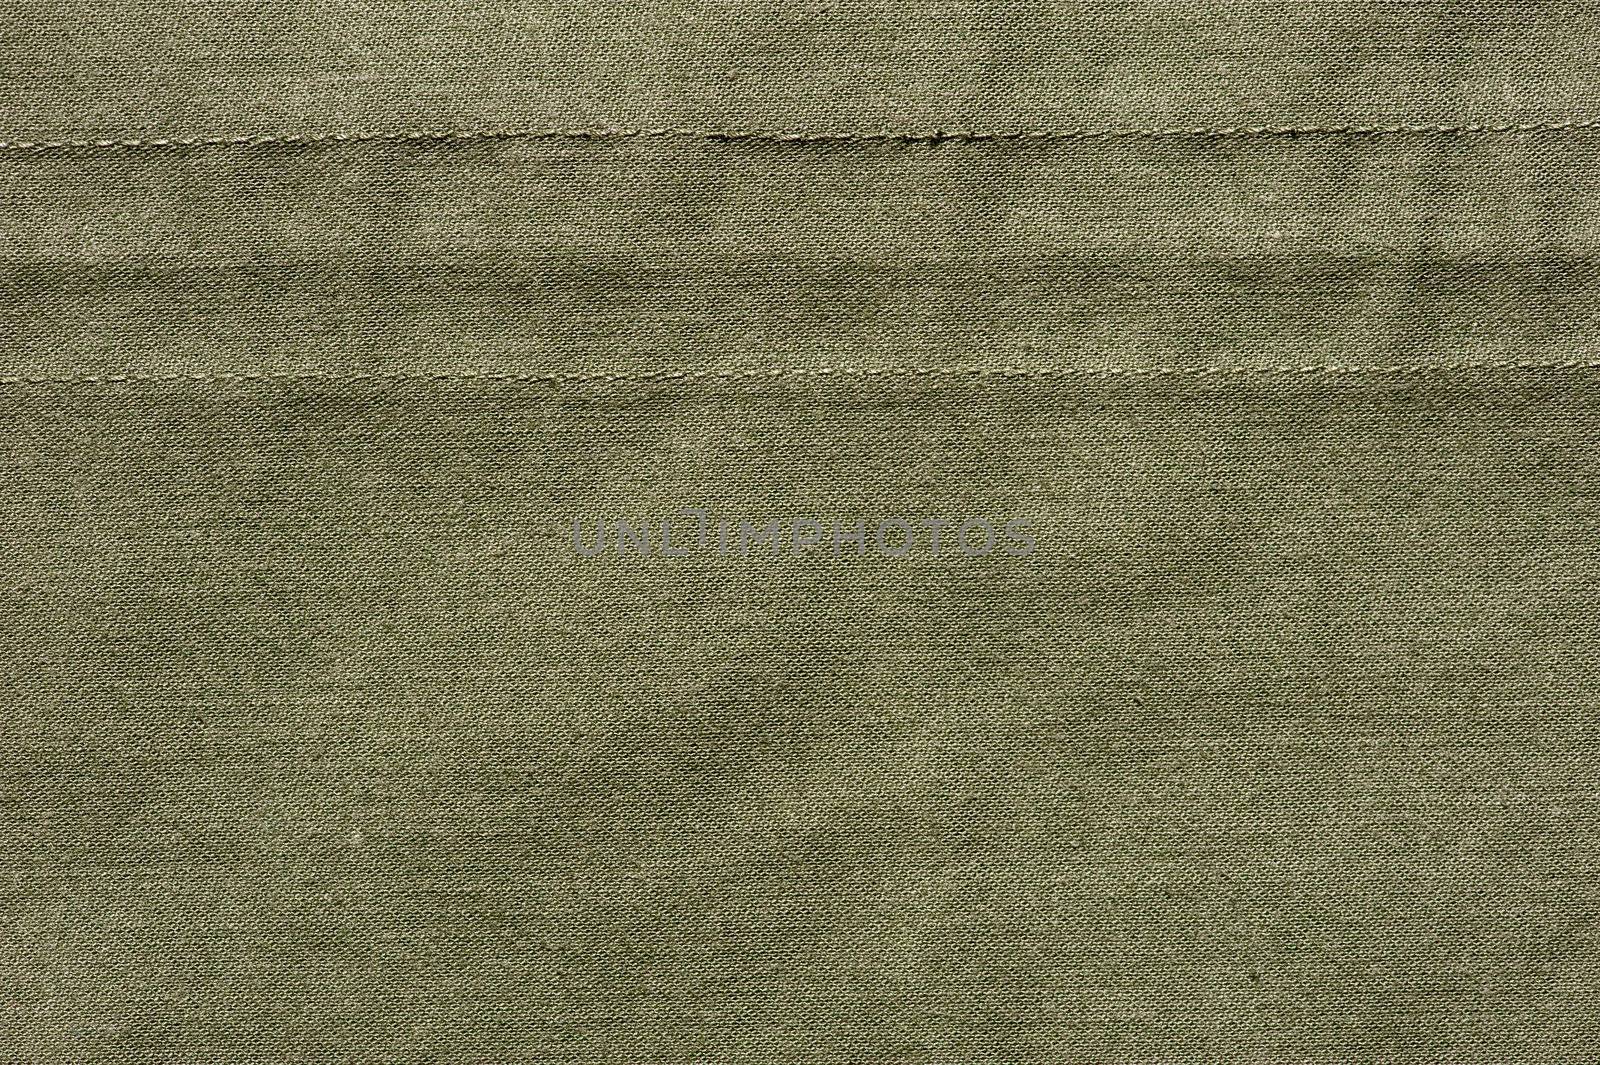 Natural hessian canvas texture. by DNKSTUDIO